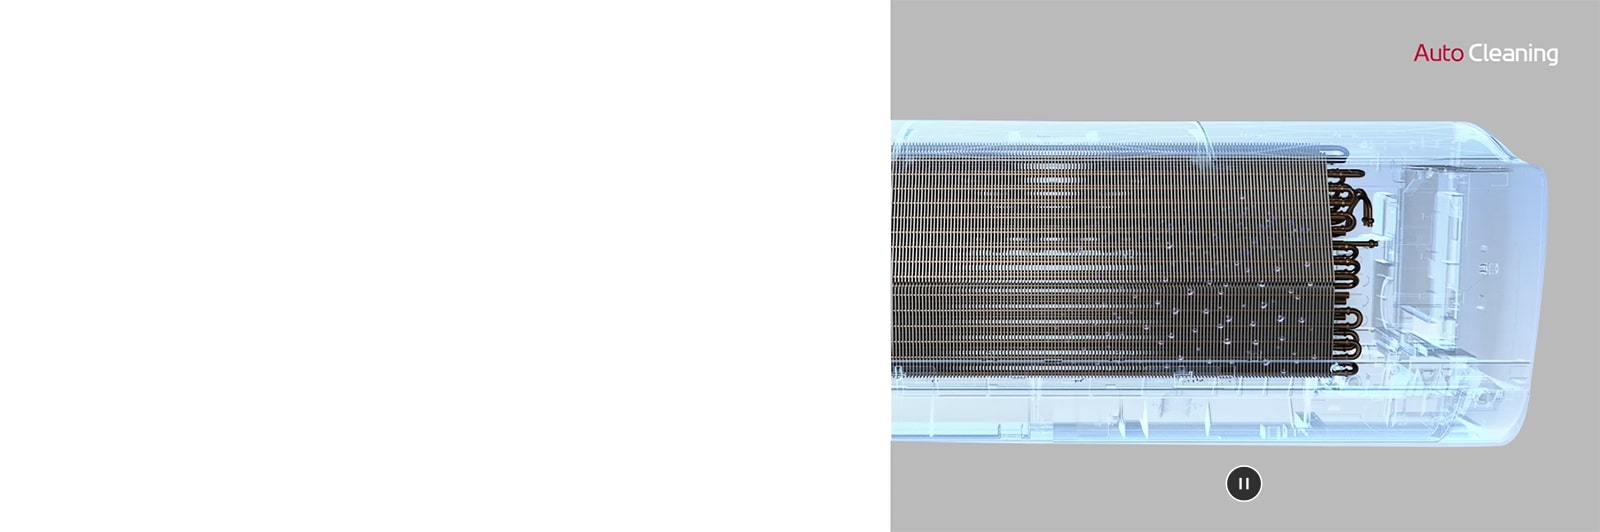 The moisture in the heat exchanger of the air conditioner disappears.